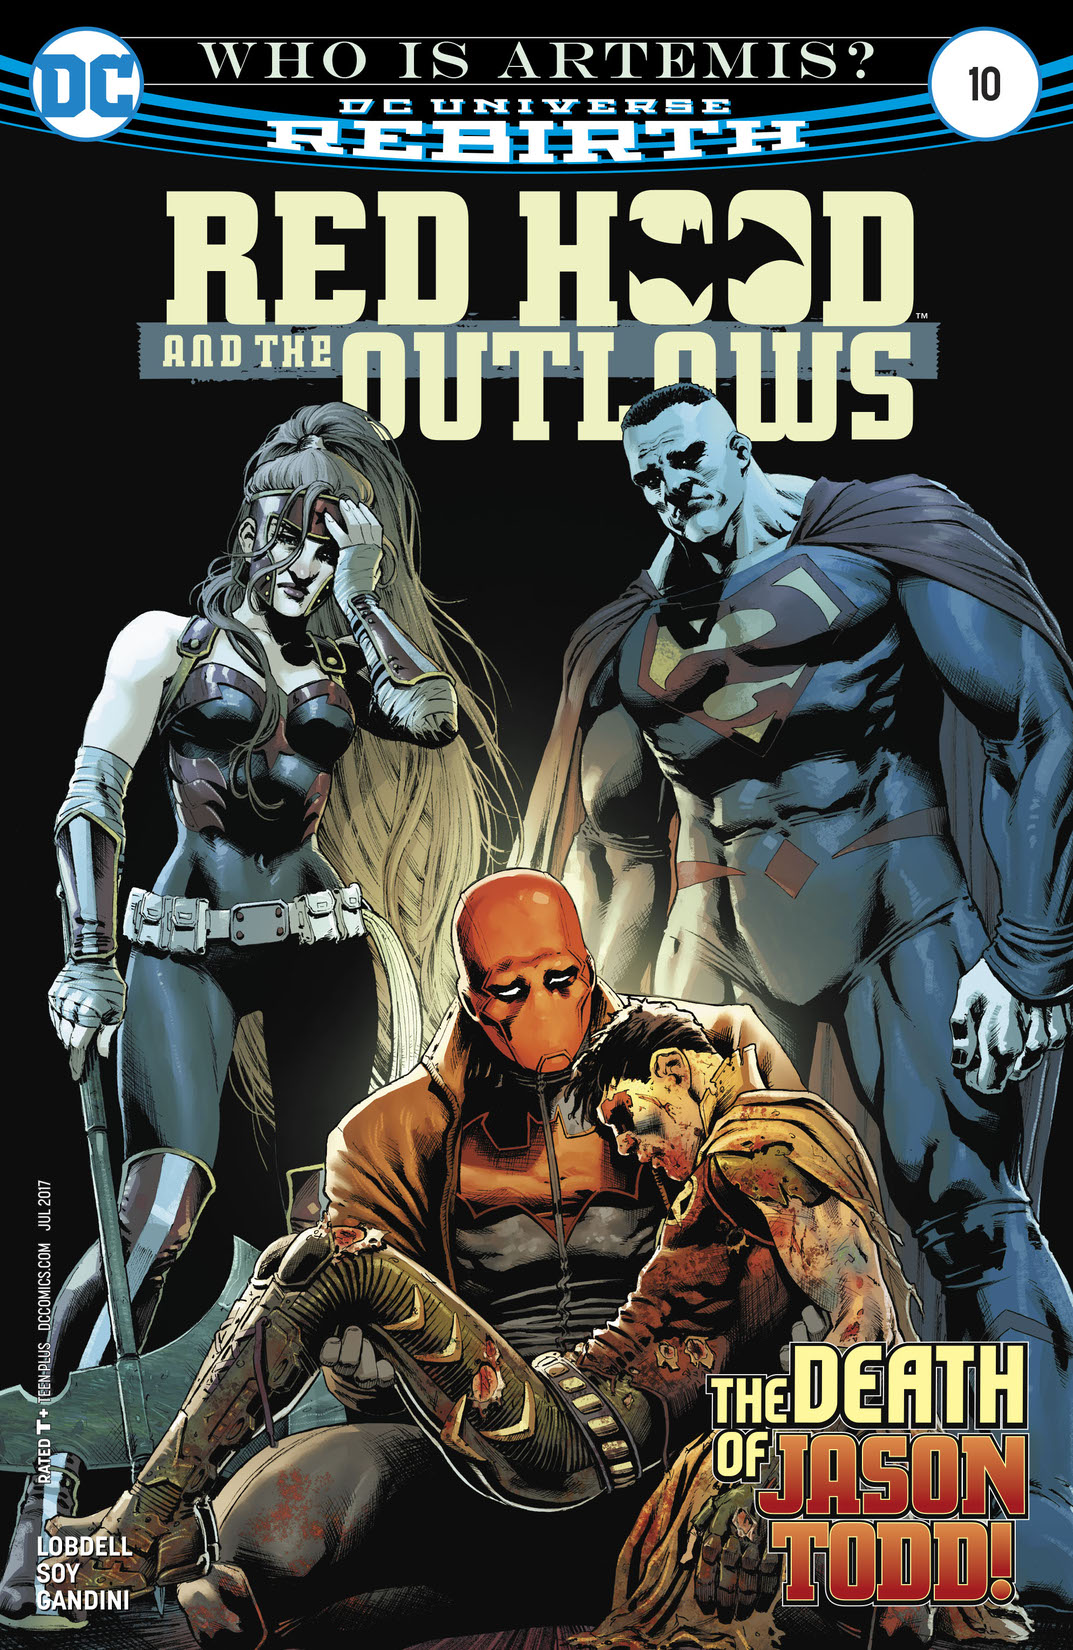 Red Hood and the Outlaws (2016-) #10 preview images